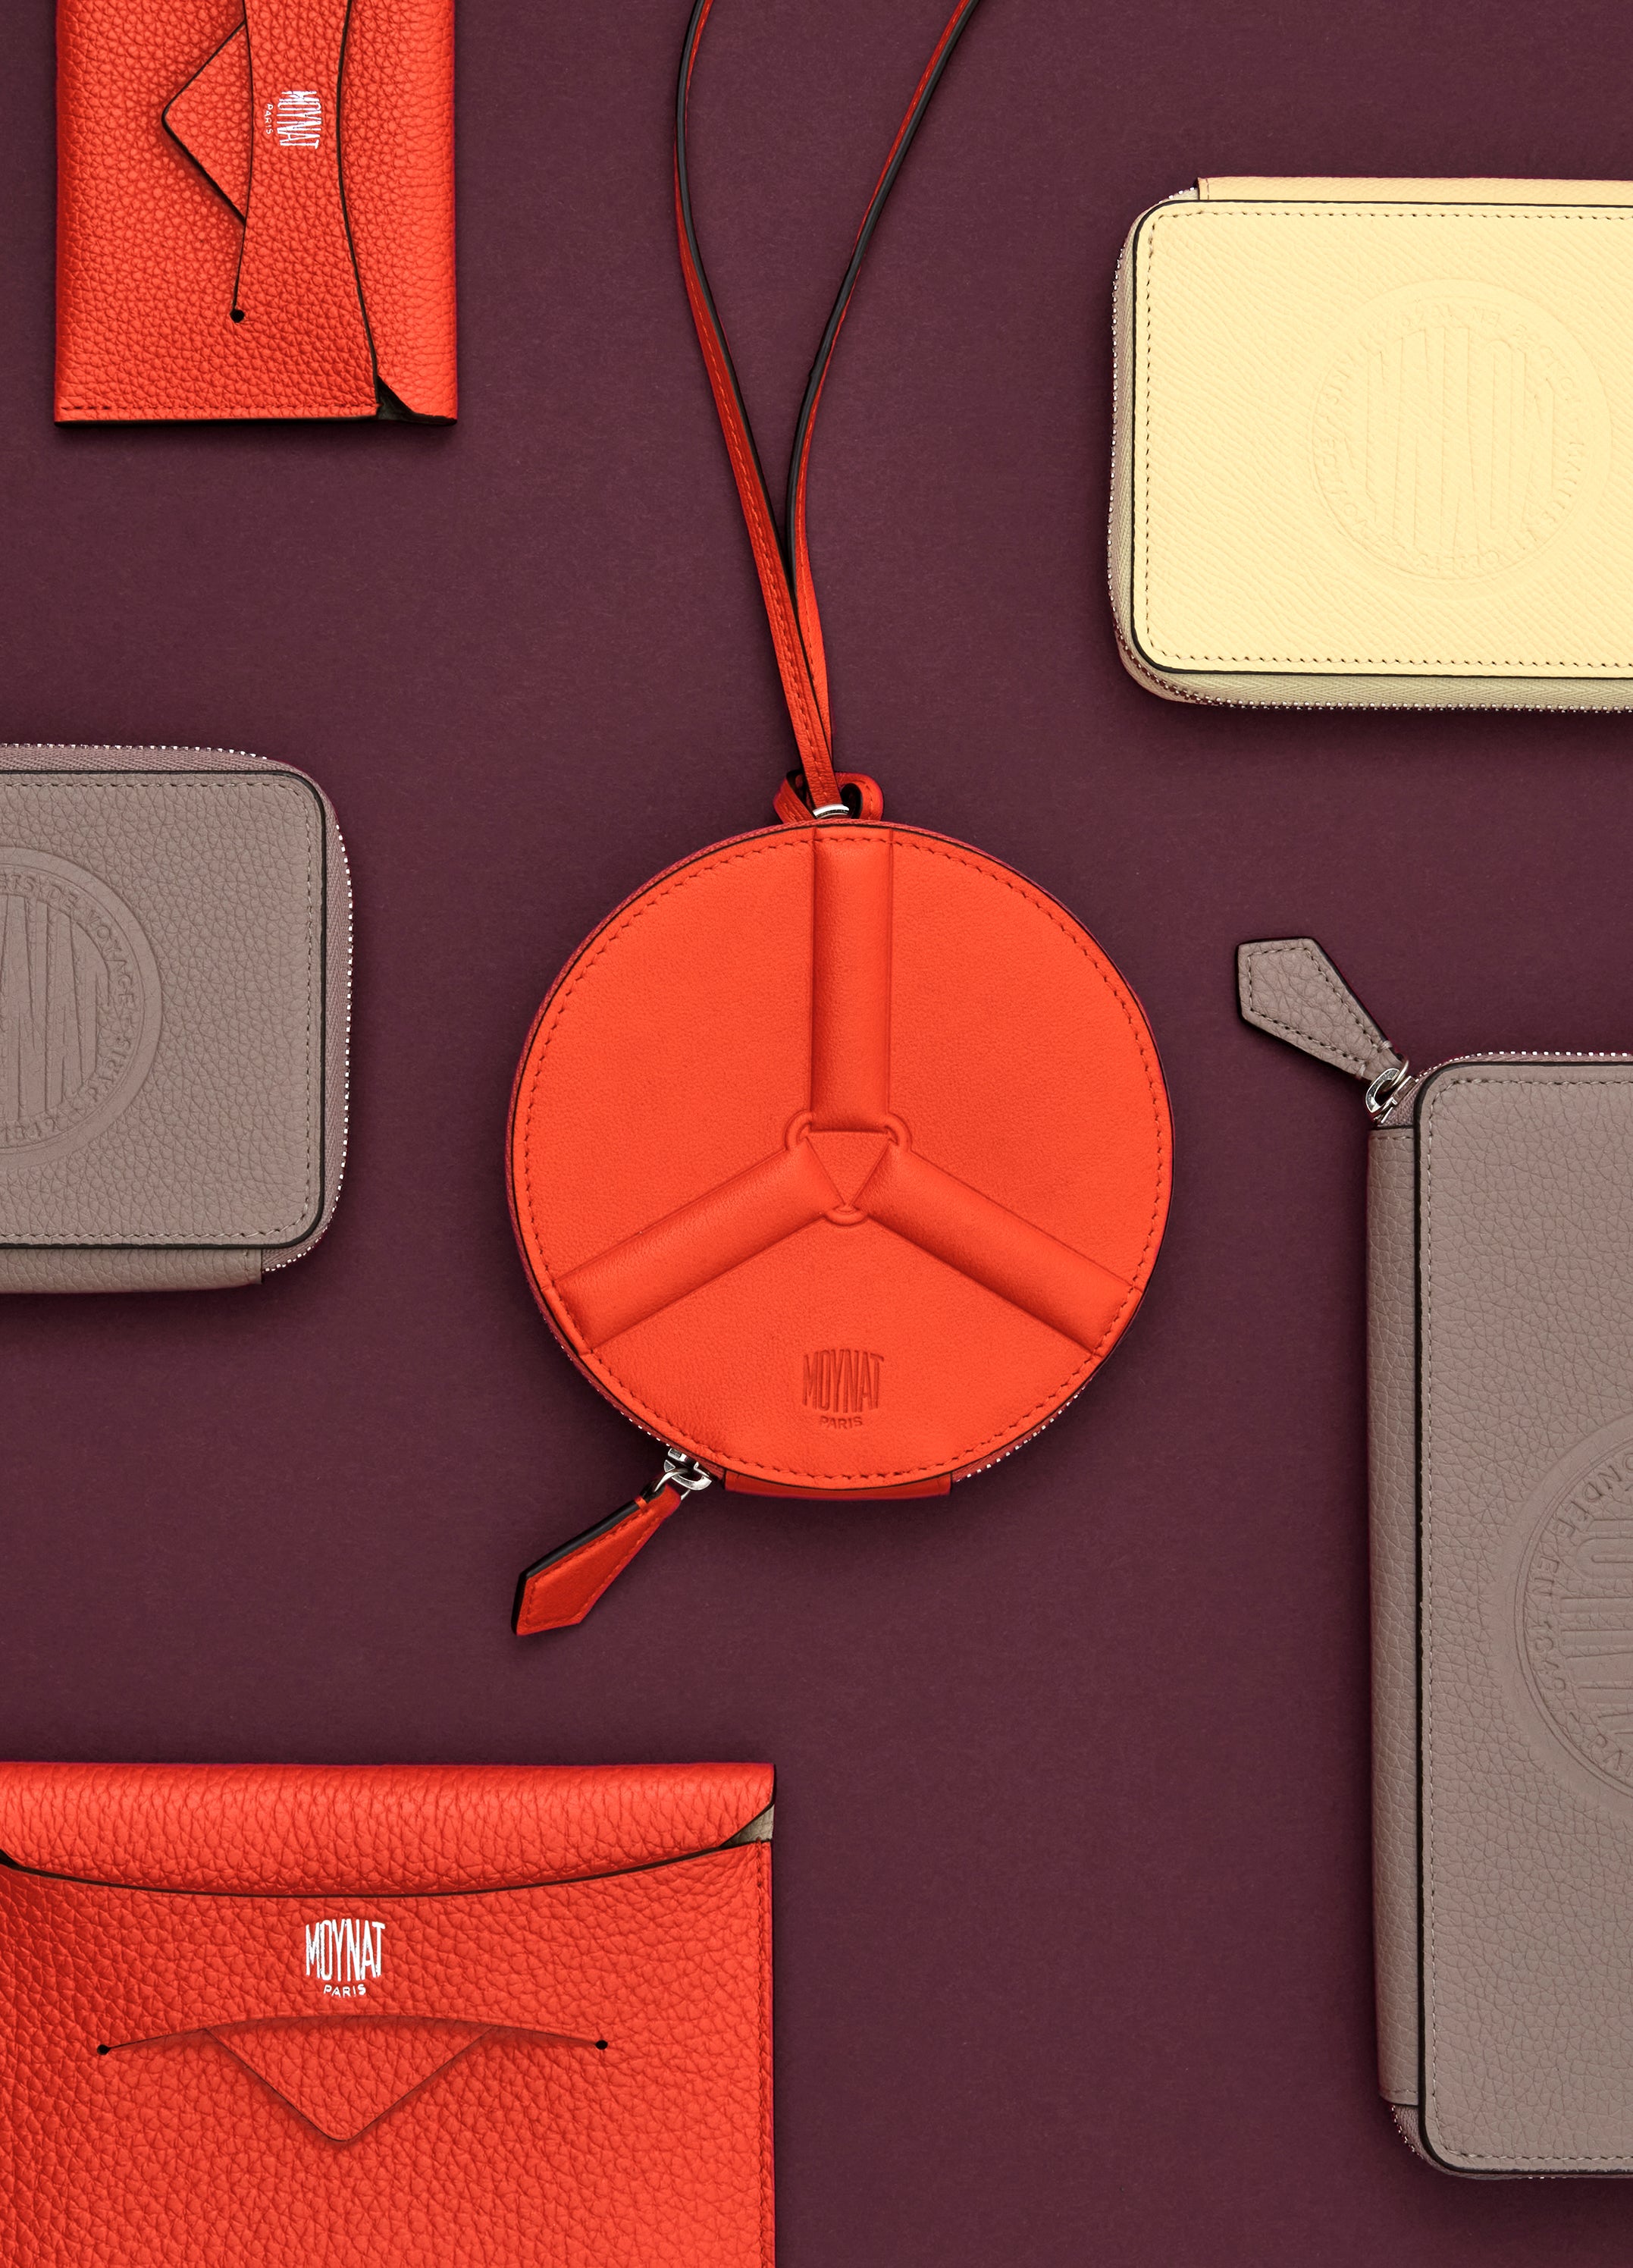 Leather Small Leather Goods – MOYNAT PARIS